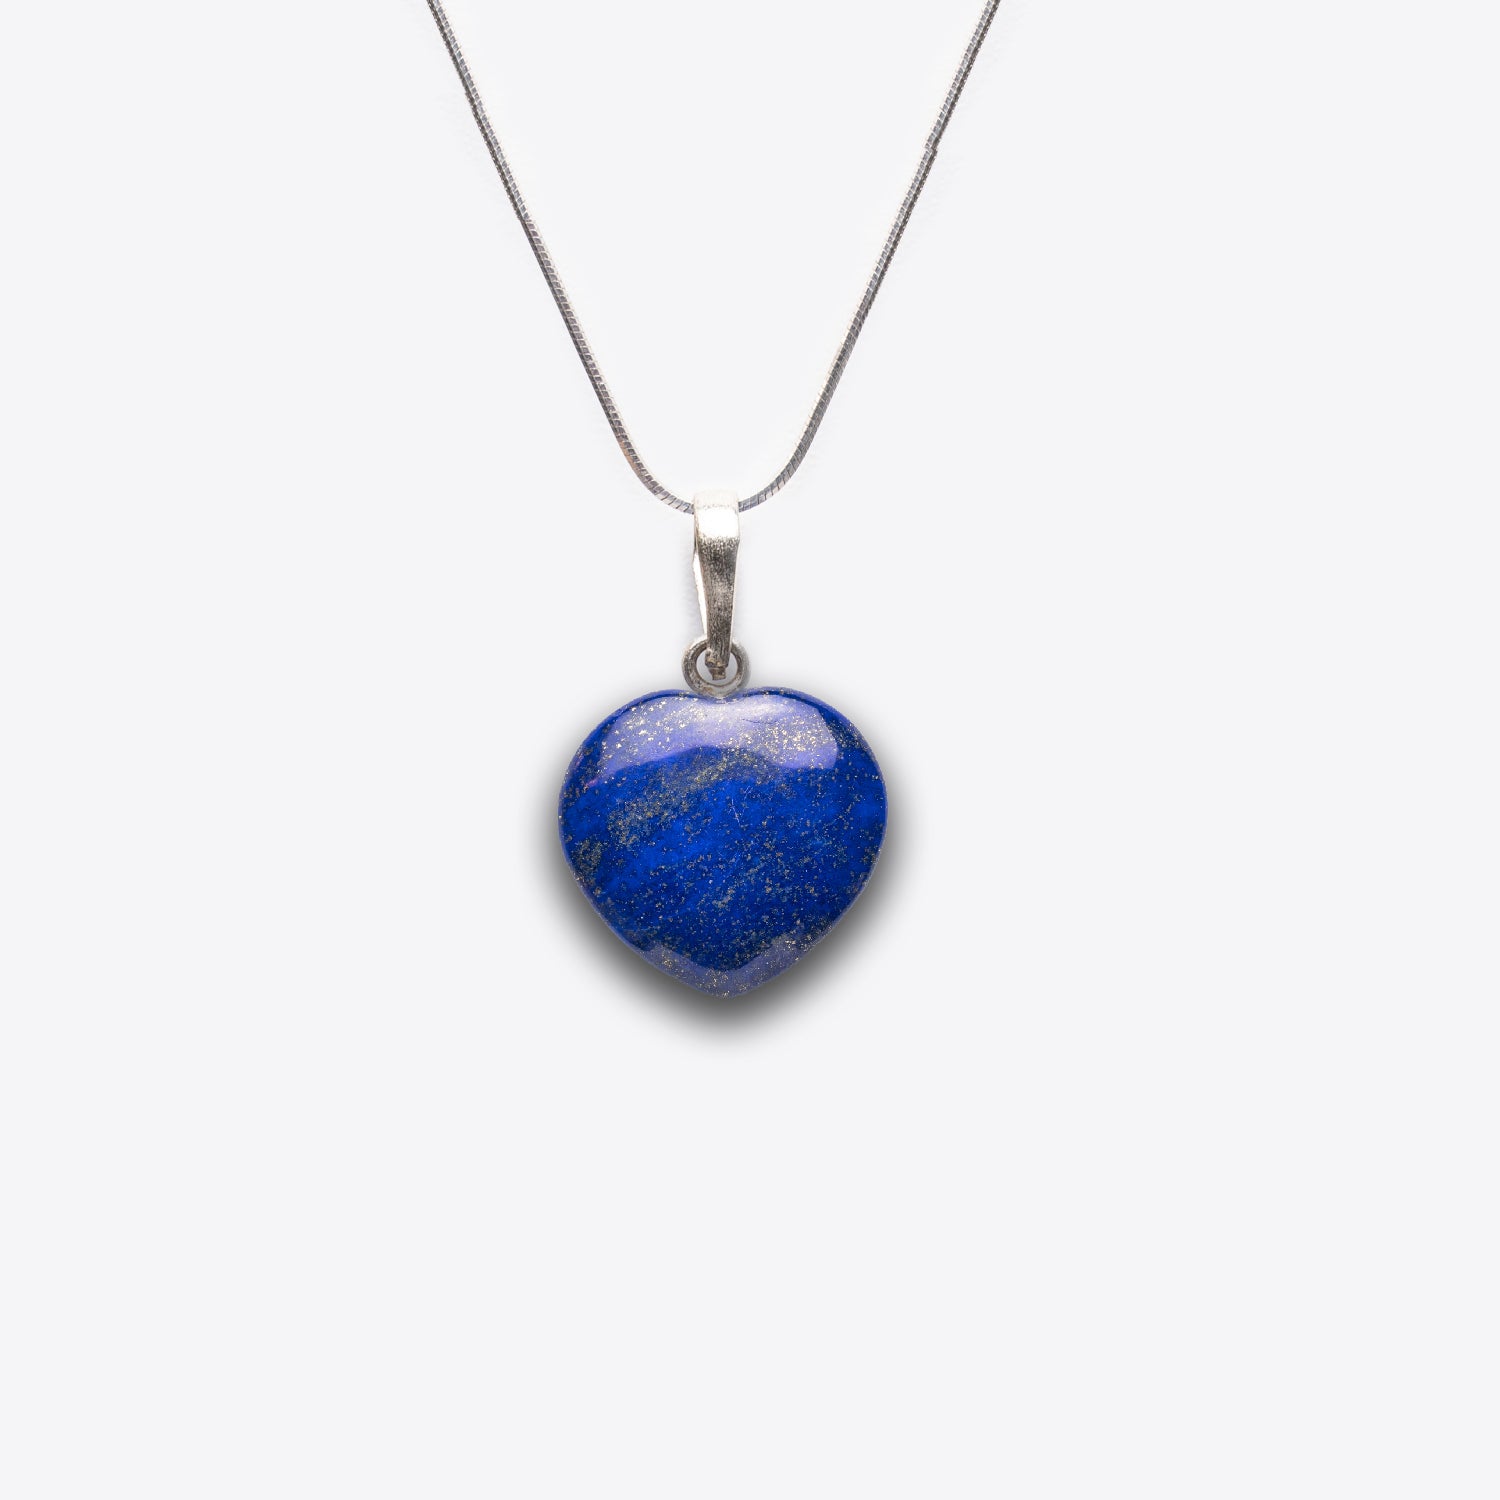 Genuine Lapis Lazuli Heart Pendant (4-6 grams) with Sterling Silver Chain